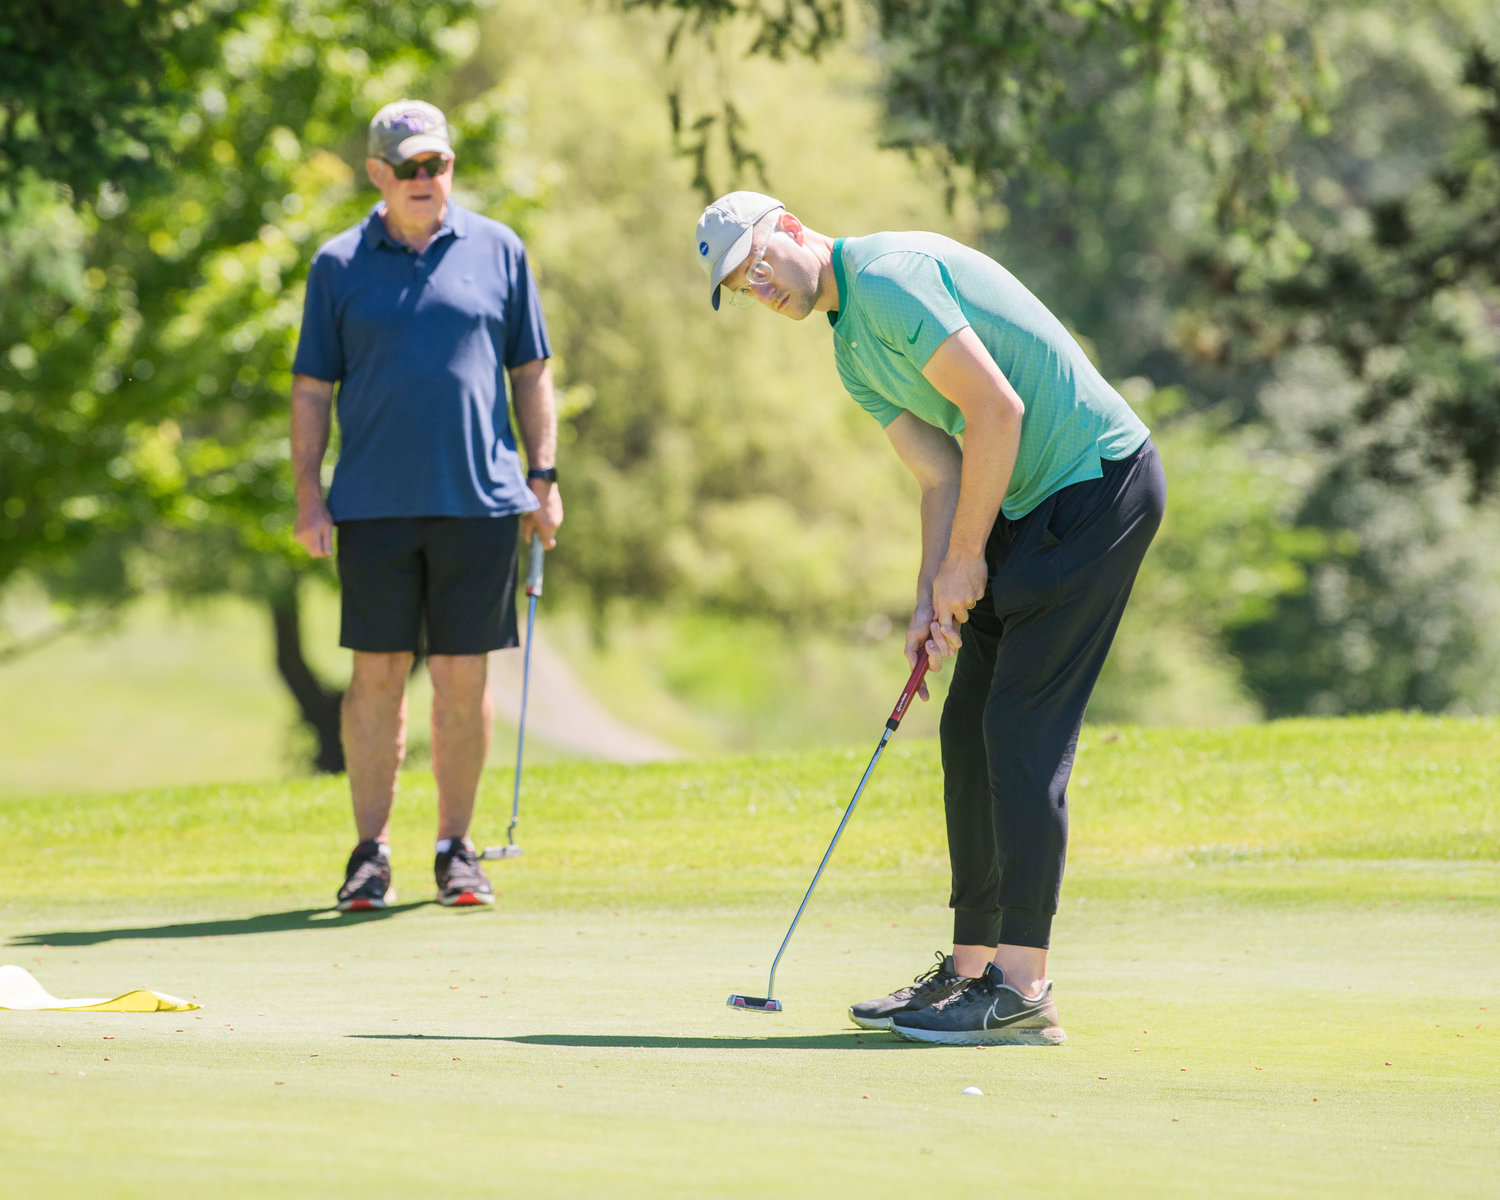 Mark McHugh makes a birdie during a charity golf tournament at Riverside Golf Course in Chehalis on Friday.